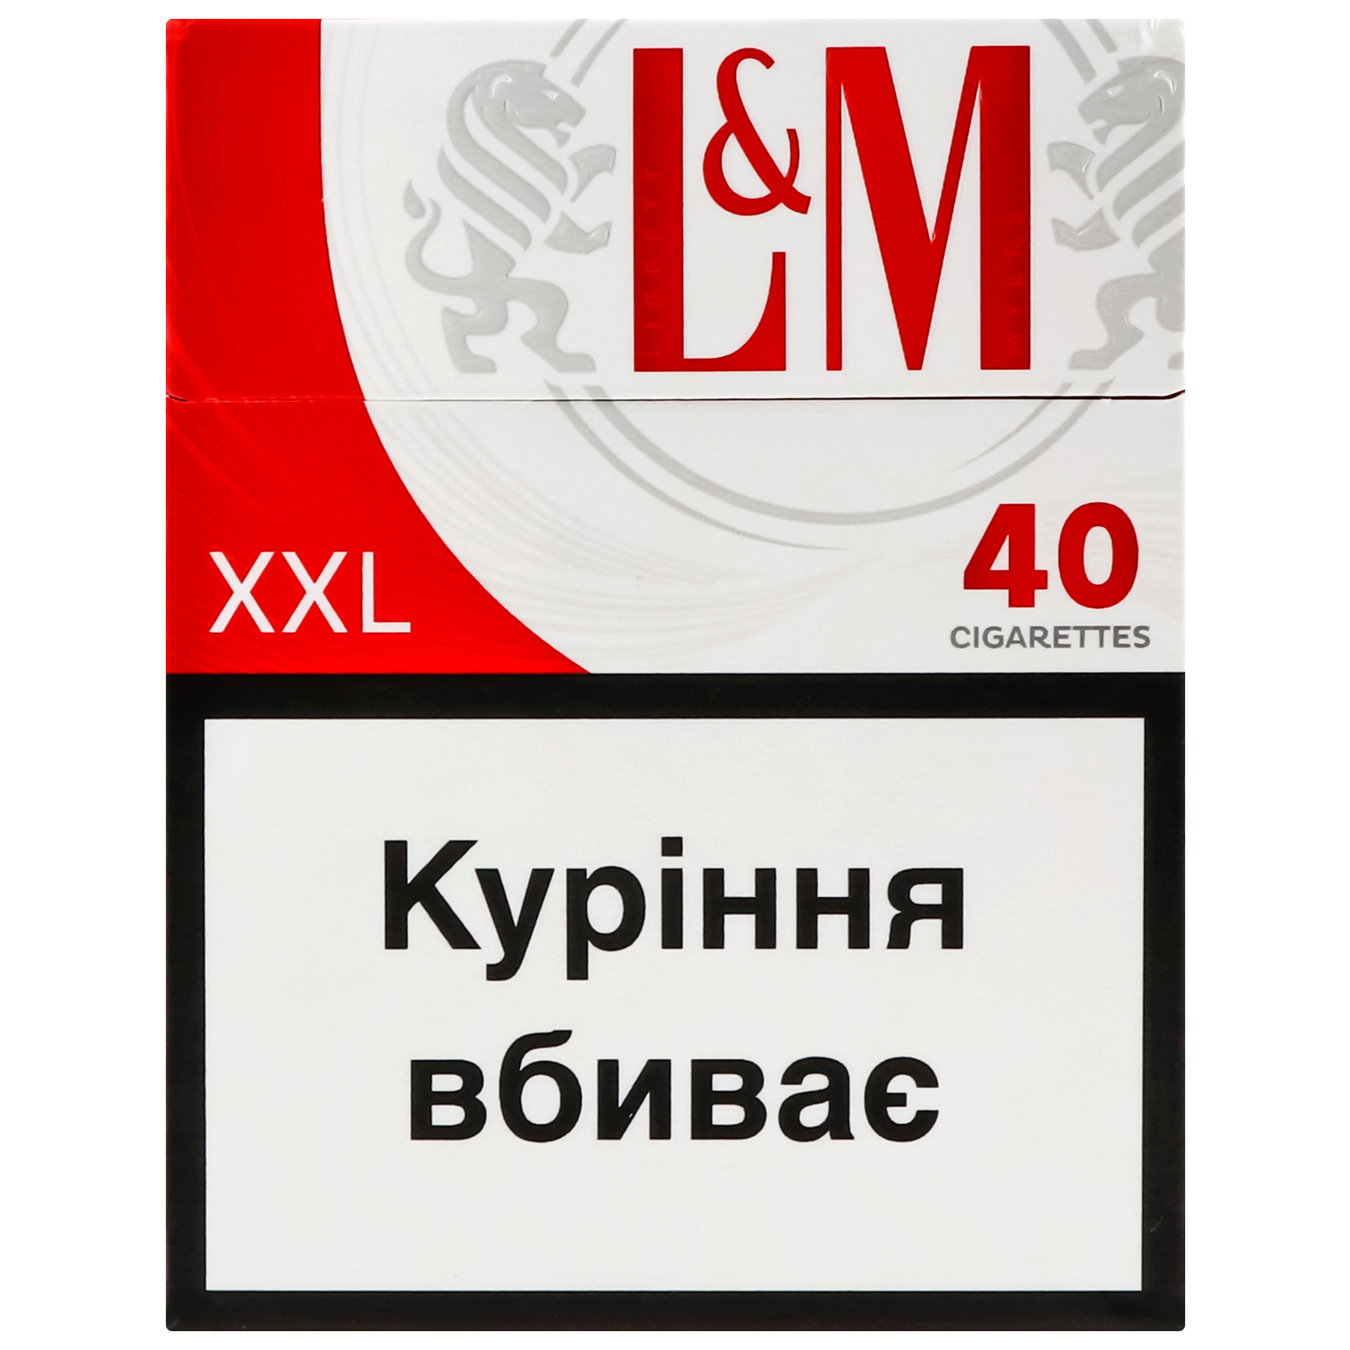 Cigarettes L&M Red Label 40pcs (the price is indicated without excise tax)